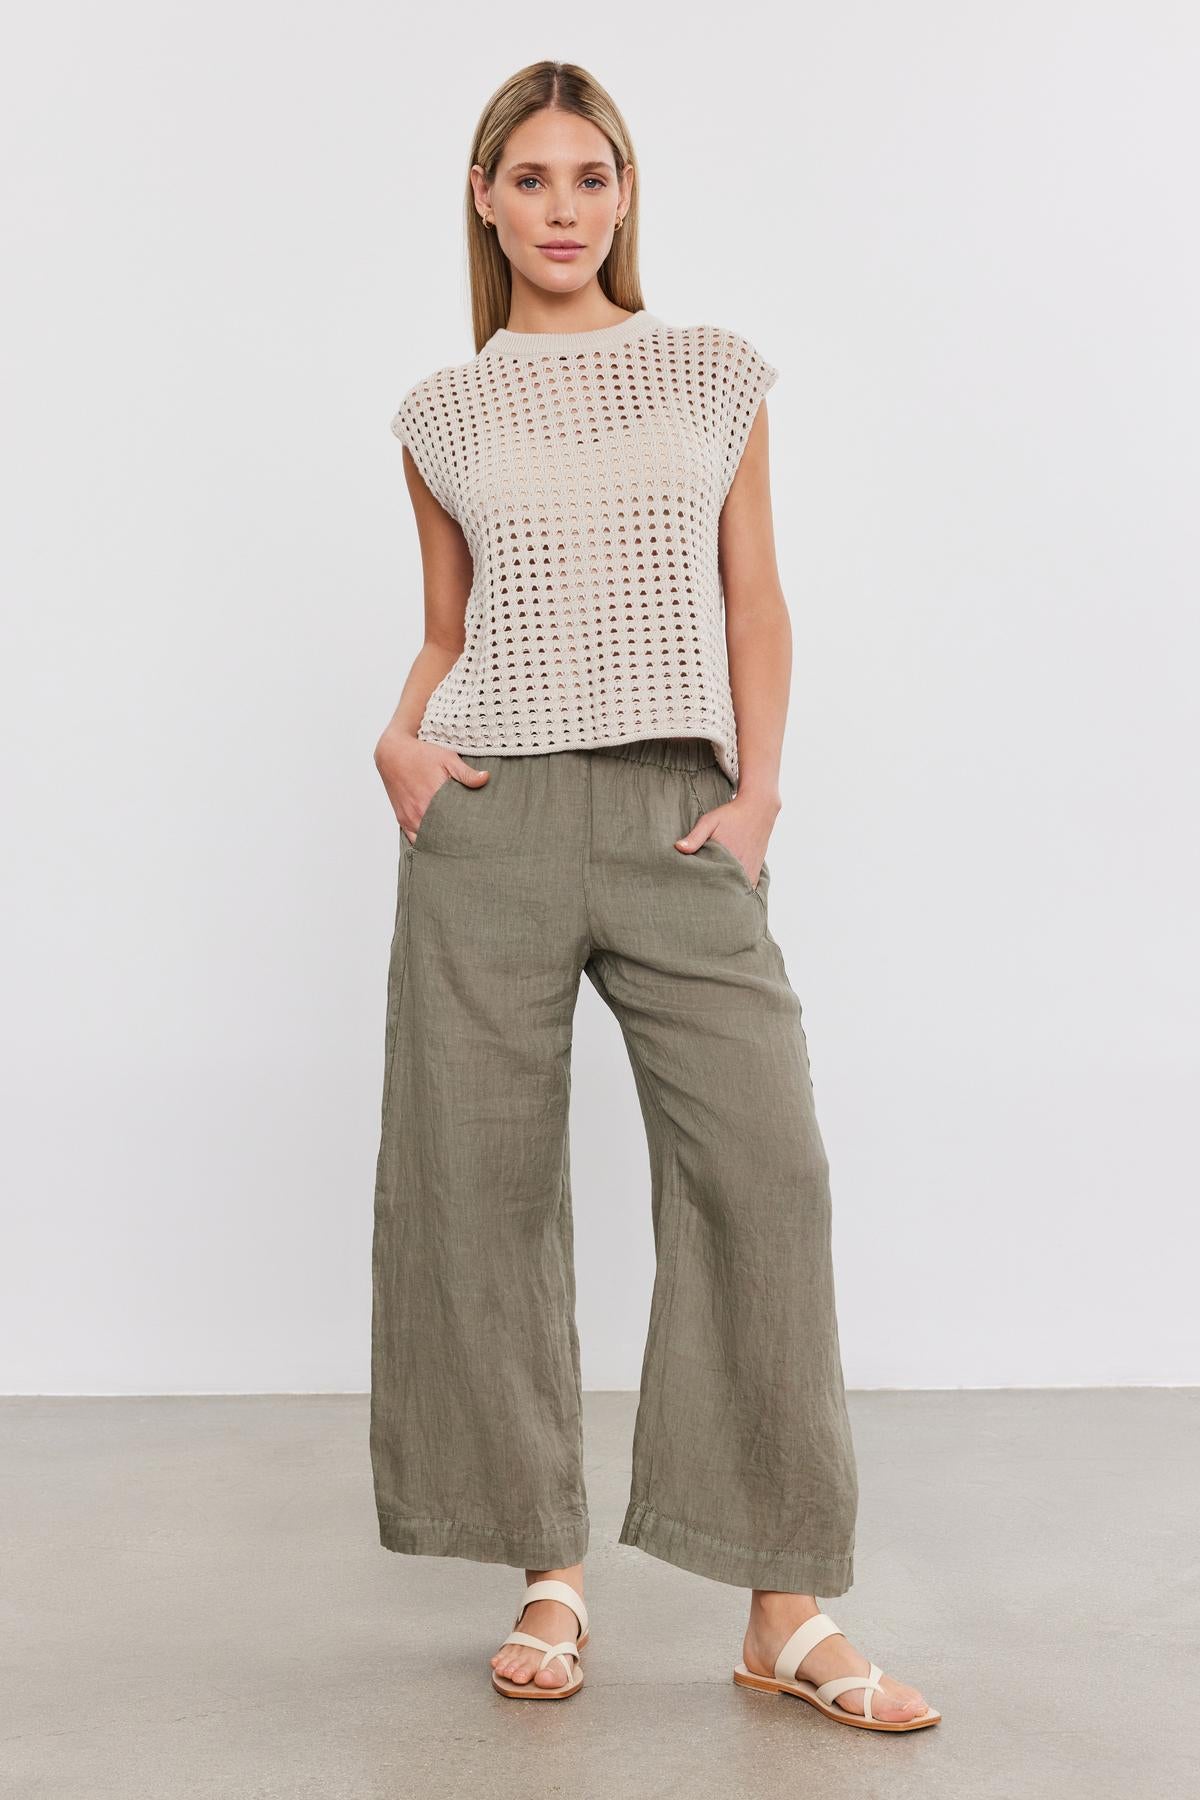 A person stands against a plain background, wearing a light beige knitted sleeveless top, LOLA LINEN PANT by Velvet by Graham & Spencer in olive green, and white sandals. Hands are in pockets, and the person is looking straight ahead.-36910043070657